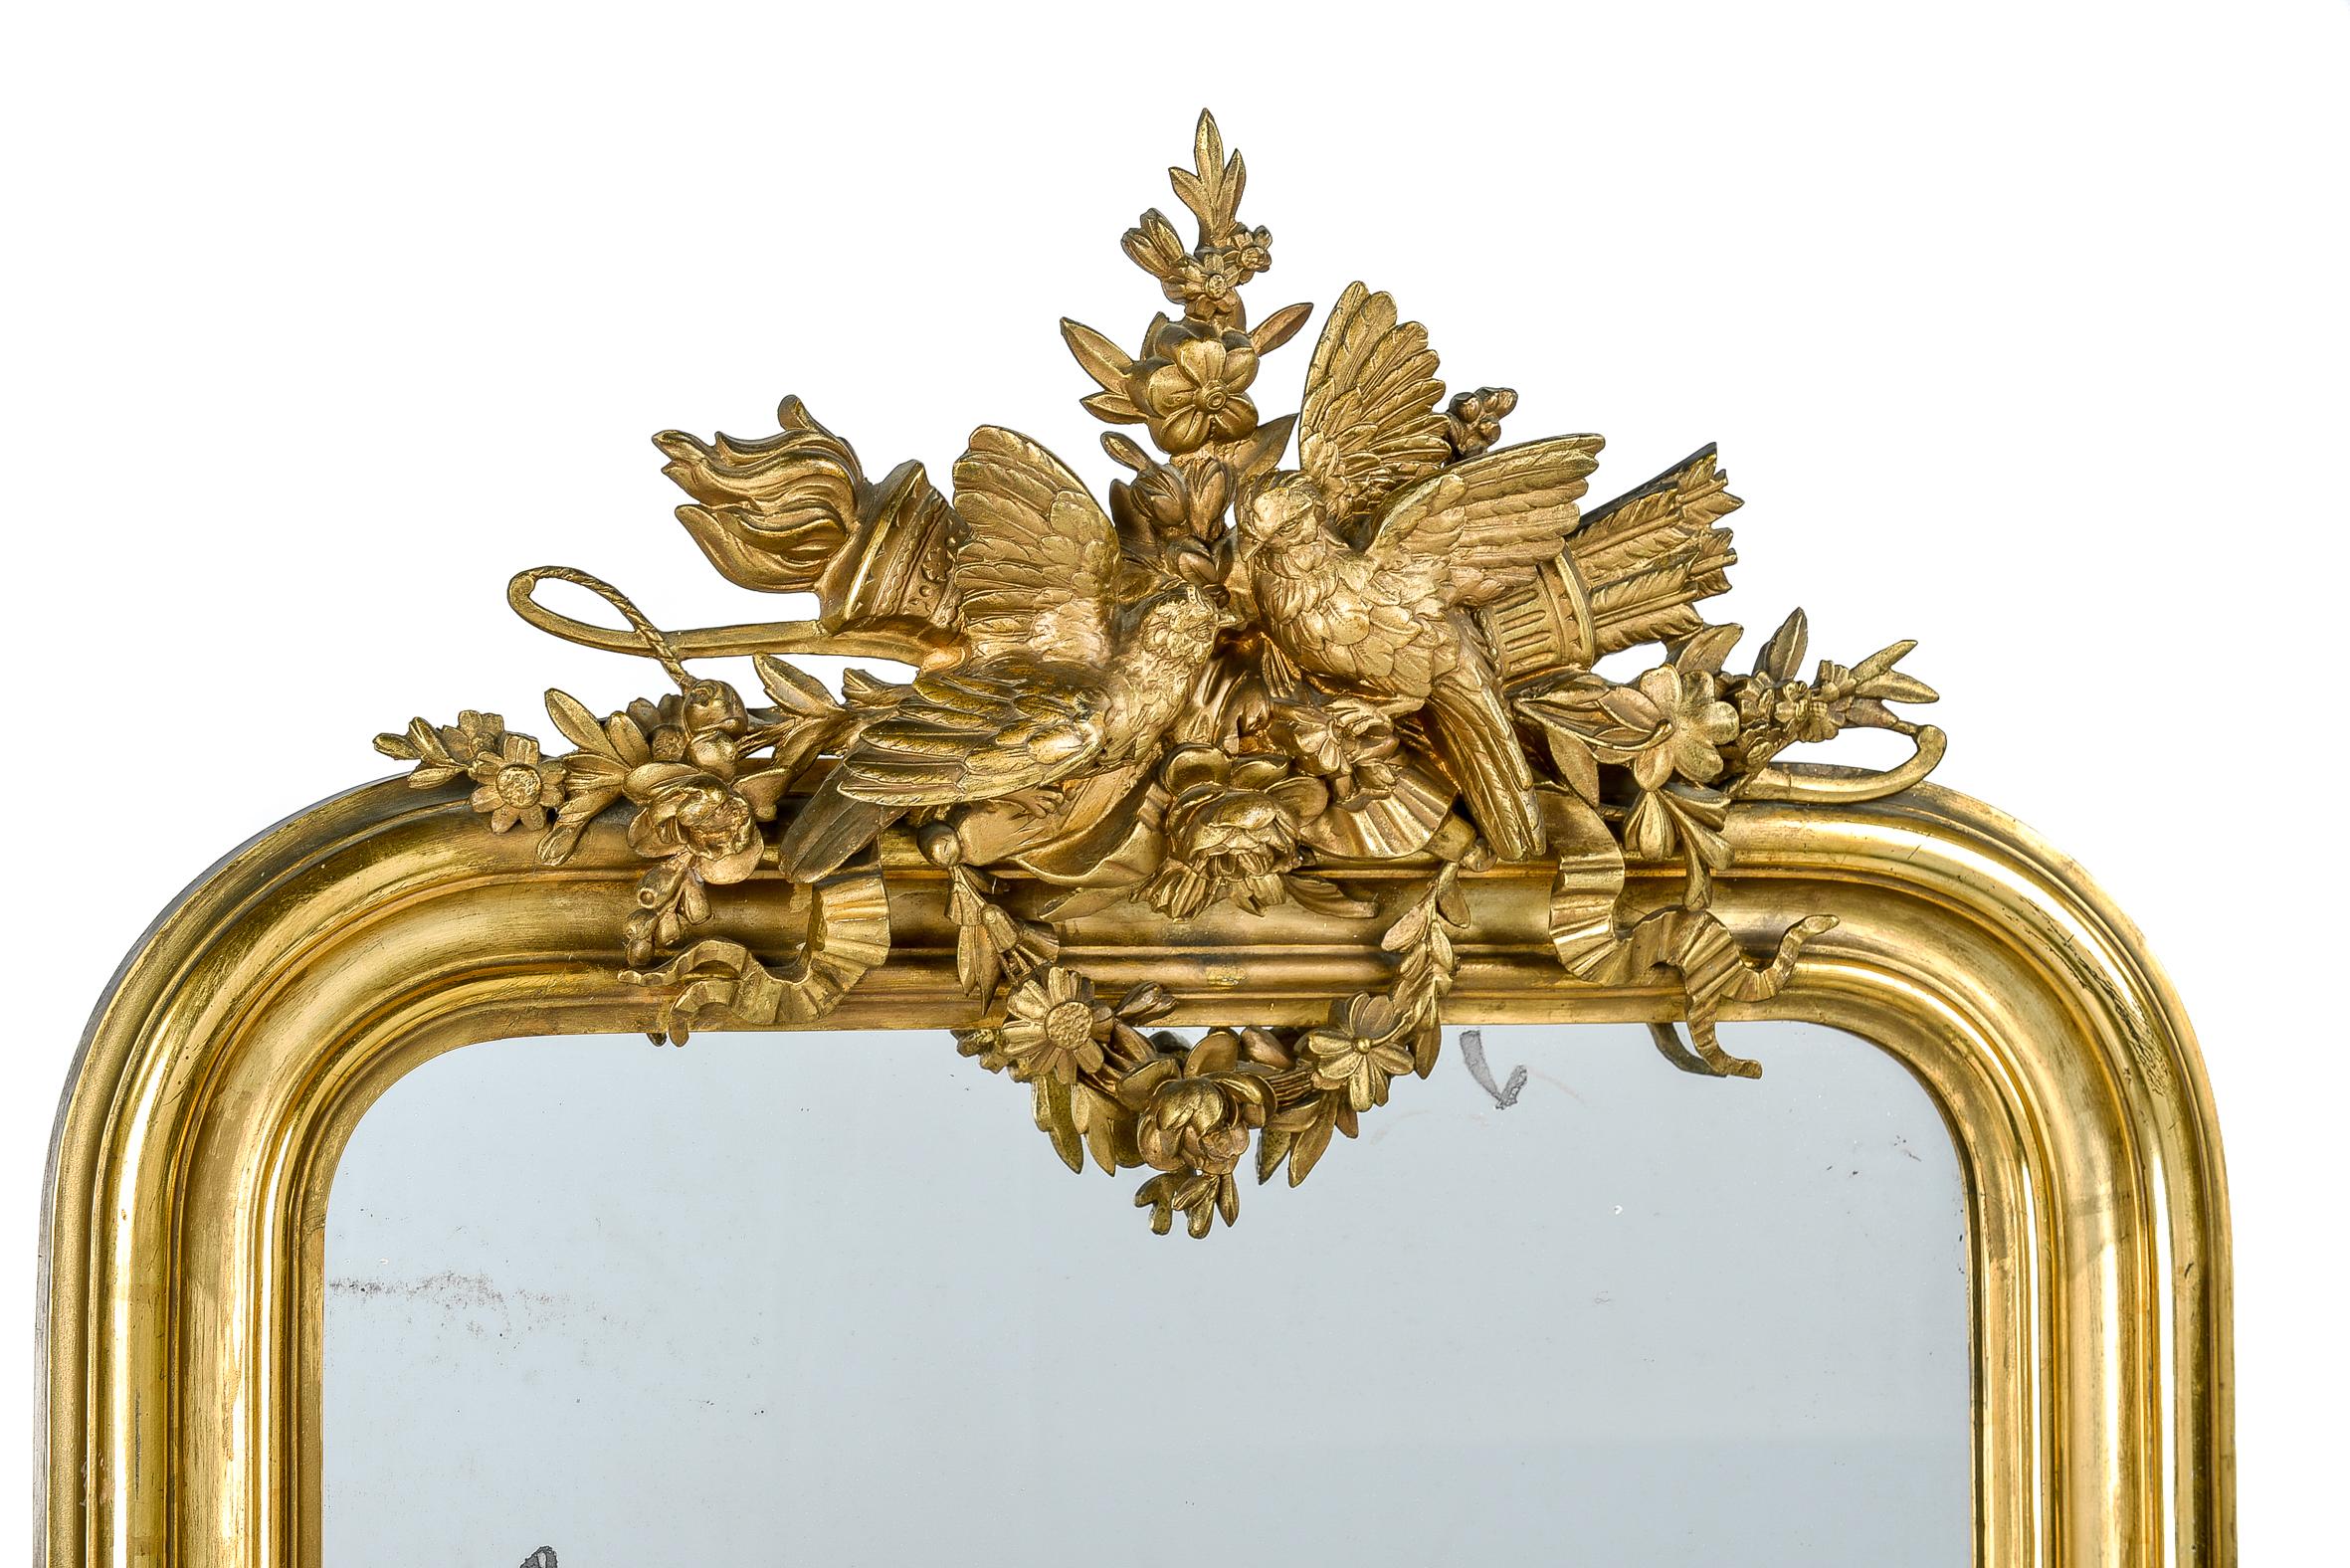 Gilt Antique 19th Century Gold Louis Philippe Mirror with an Ornate Crest